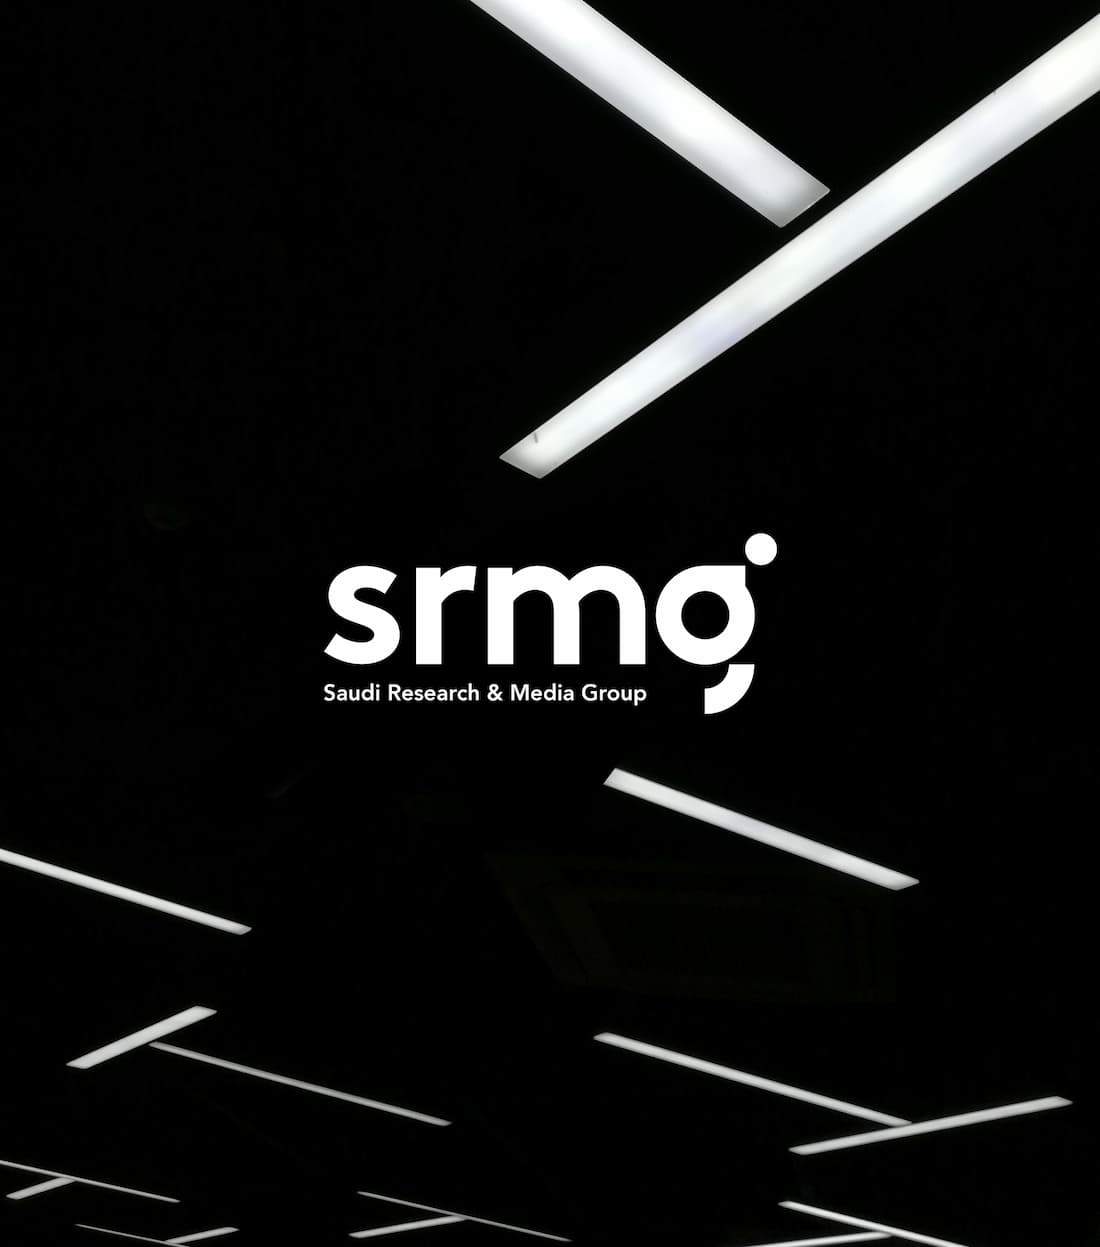 SRMG completes all conditions to acquire 51% stake in Thmanyah Publishing